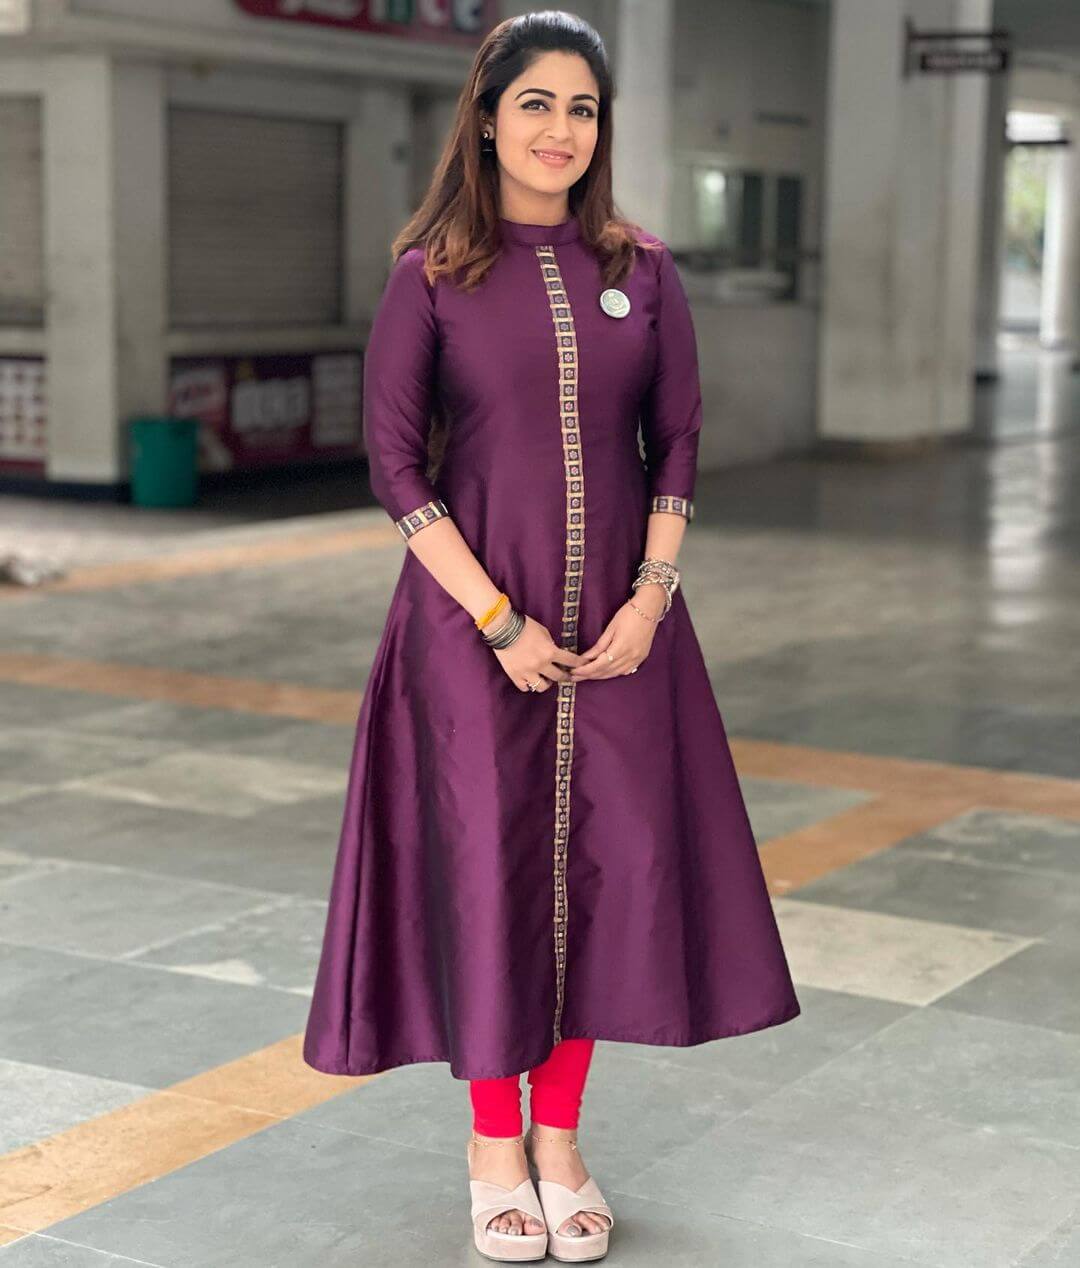 Malavika Wales Look Elegant In Purple Chic A-Line Kurta Paired With Red Legging